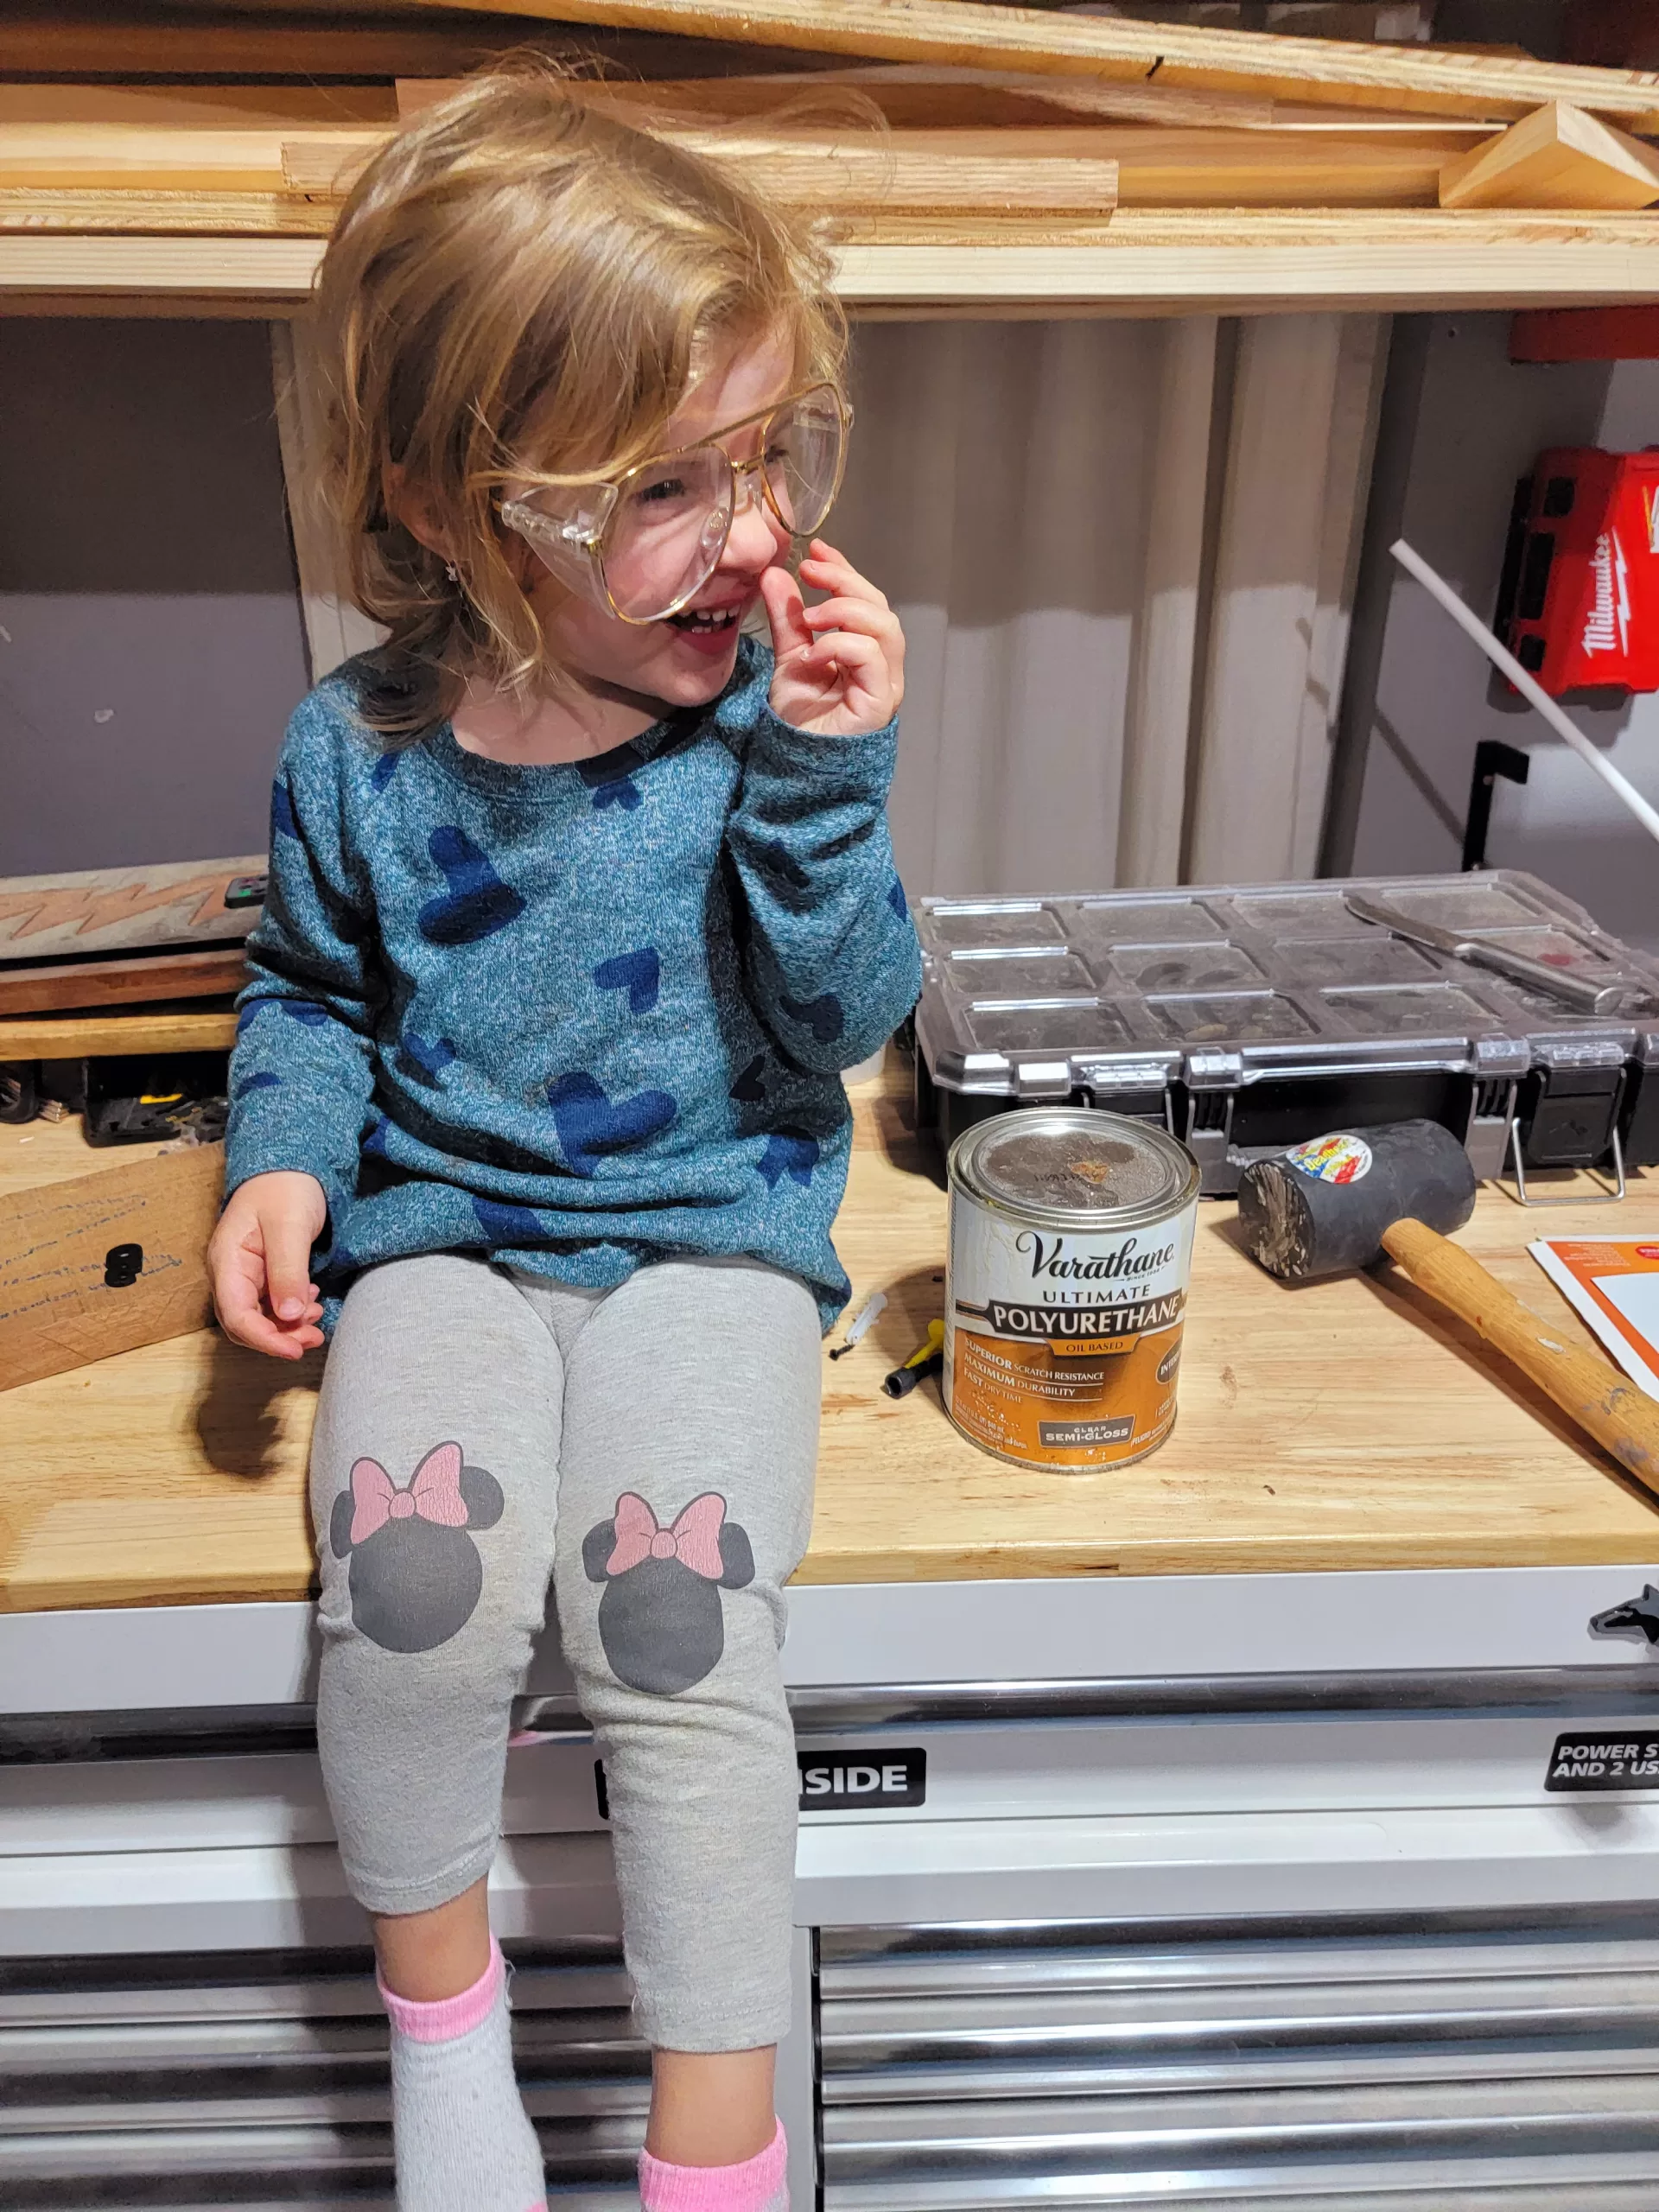 How to apply polyurethane - toddler with safety glasses